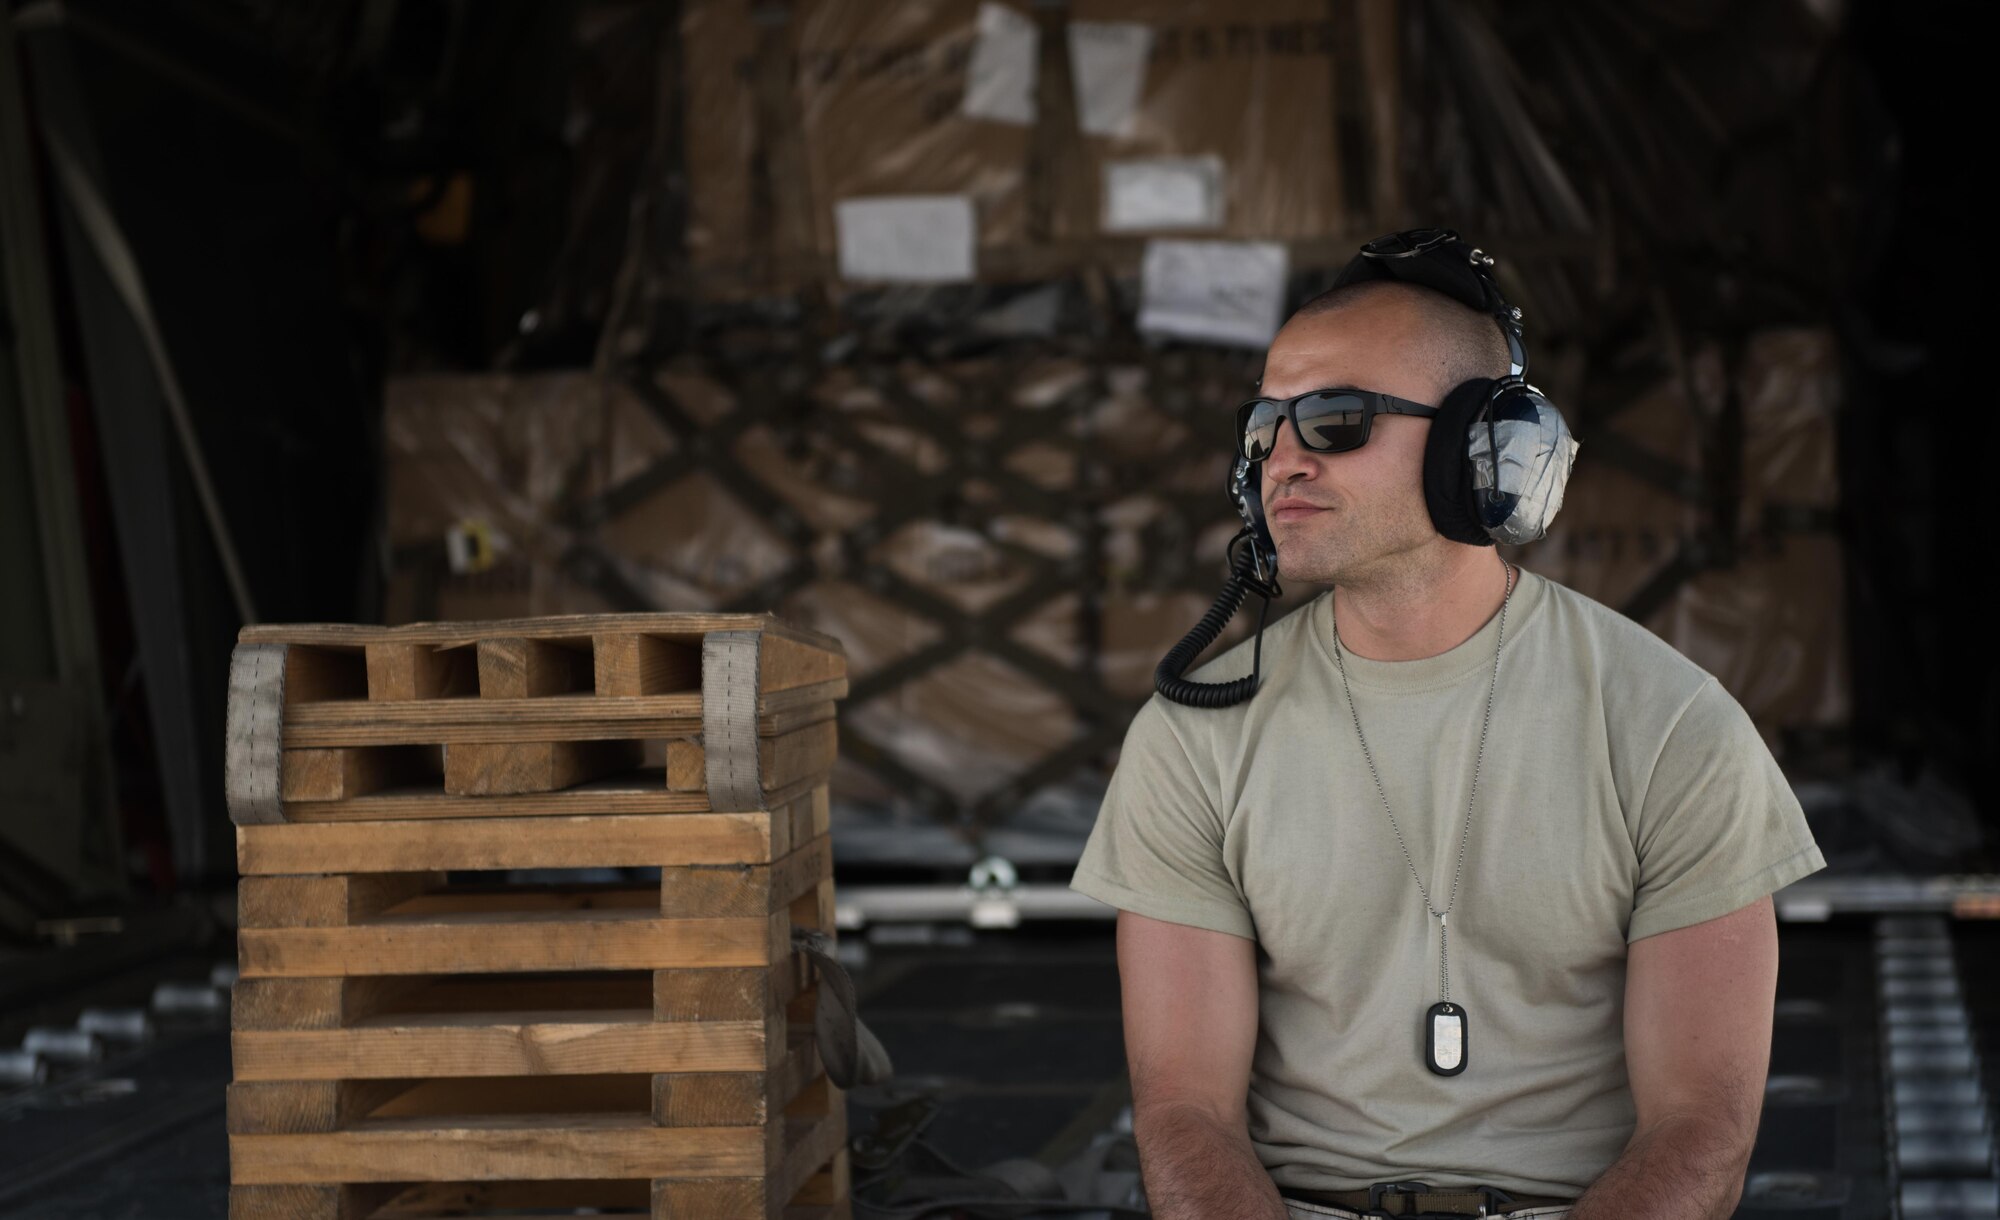 Senior Airman Brian Aviles, a 455th Expeditionary Aircraft Maintenance Squadron crew chief, takes a breather on the ramp of a C-130J Super Hercules at Bagram Airfield, Afghanistan, May 5, 2017. A crew chief ensures the interior and exterior of an aircraft is fully functional. If an issue is discovered on the aircraft that can’t be fixed on the spot, they will request support from specialized maintenance Airmen. (U.S. Air Force photo by Staff Sgt. Benjamin Gonsier)